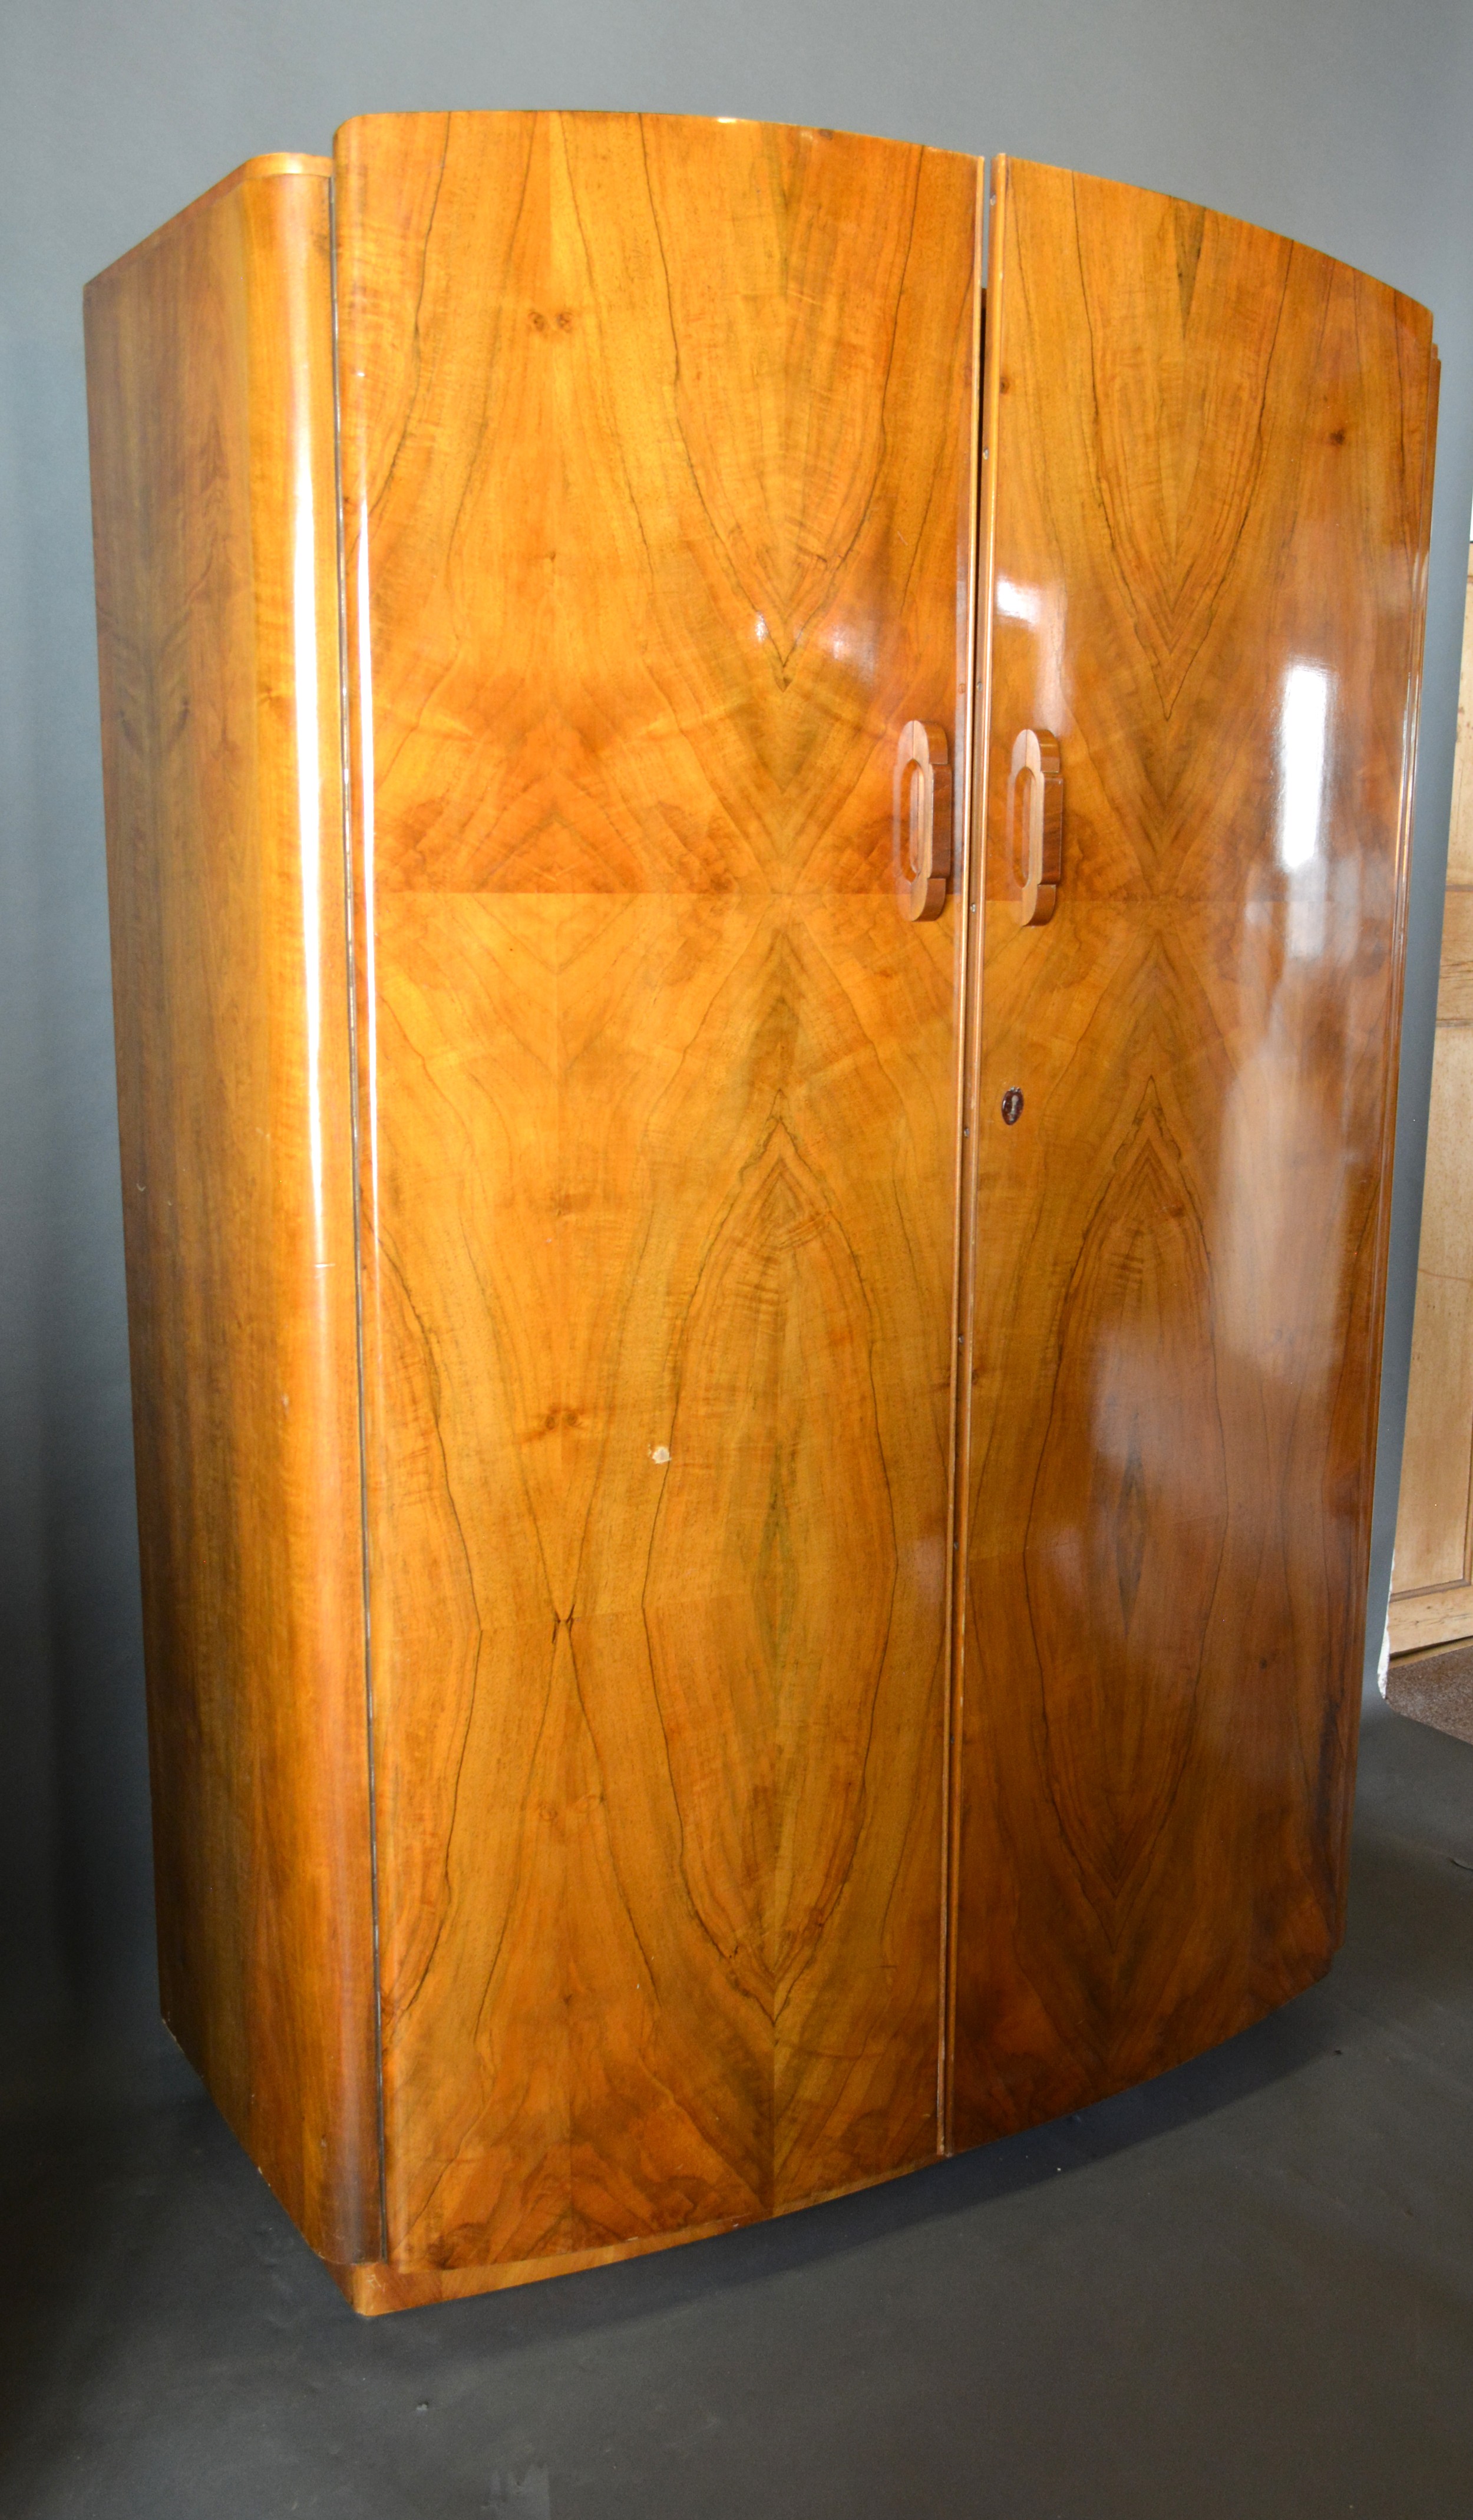 An Art Deco Walnut Bedroom Suite comprising dressing table, two wardrobes and a bedstead - Image 2 of 4